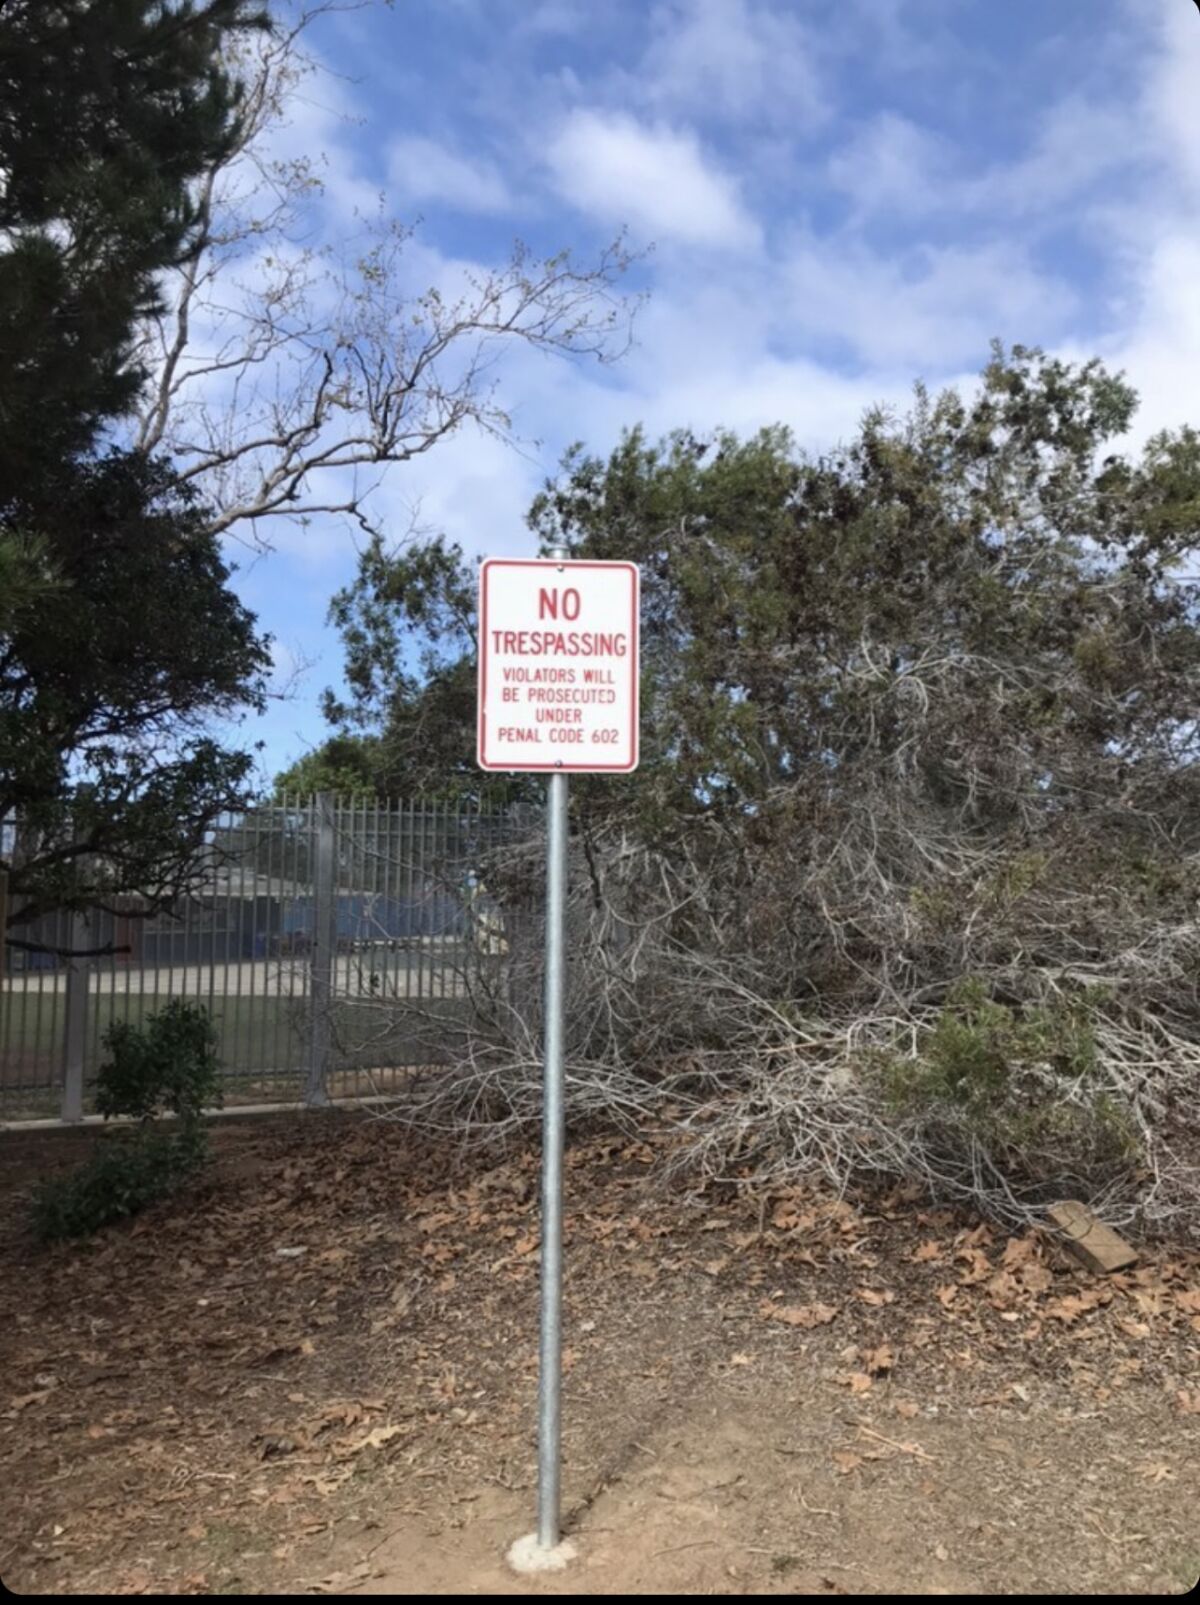 The Torrey Pines Elementary School Nature Trail, sometimes referred to as the Cliffridge Nature Trail, has been closed .